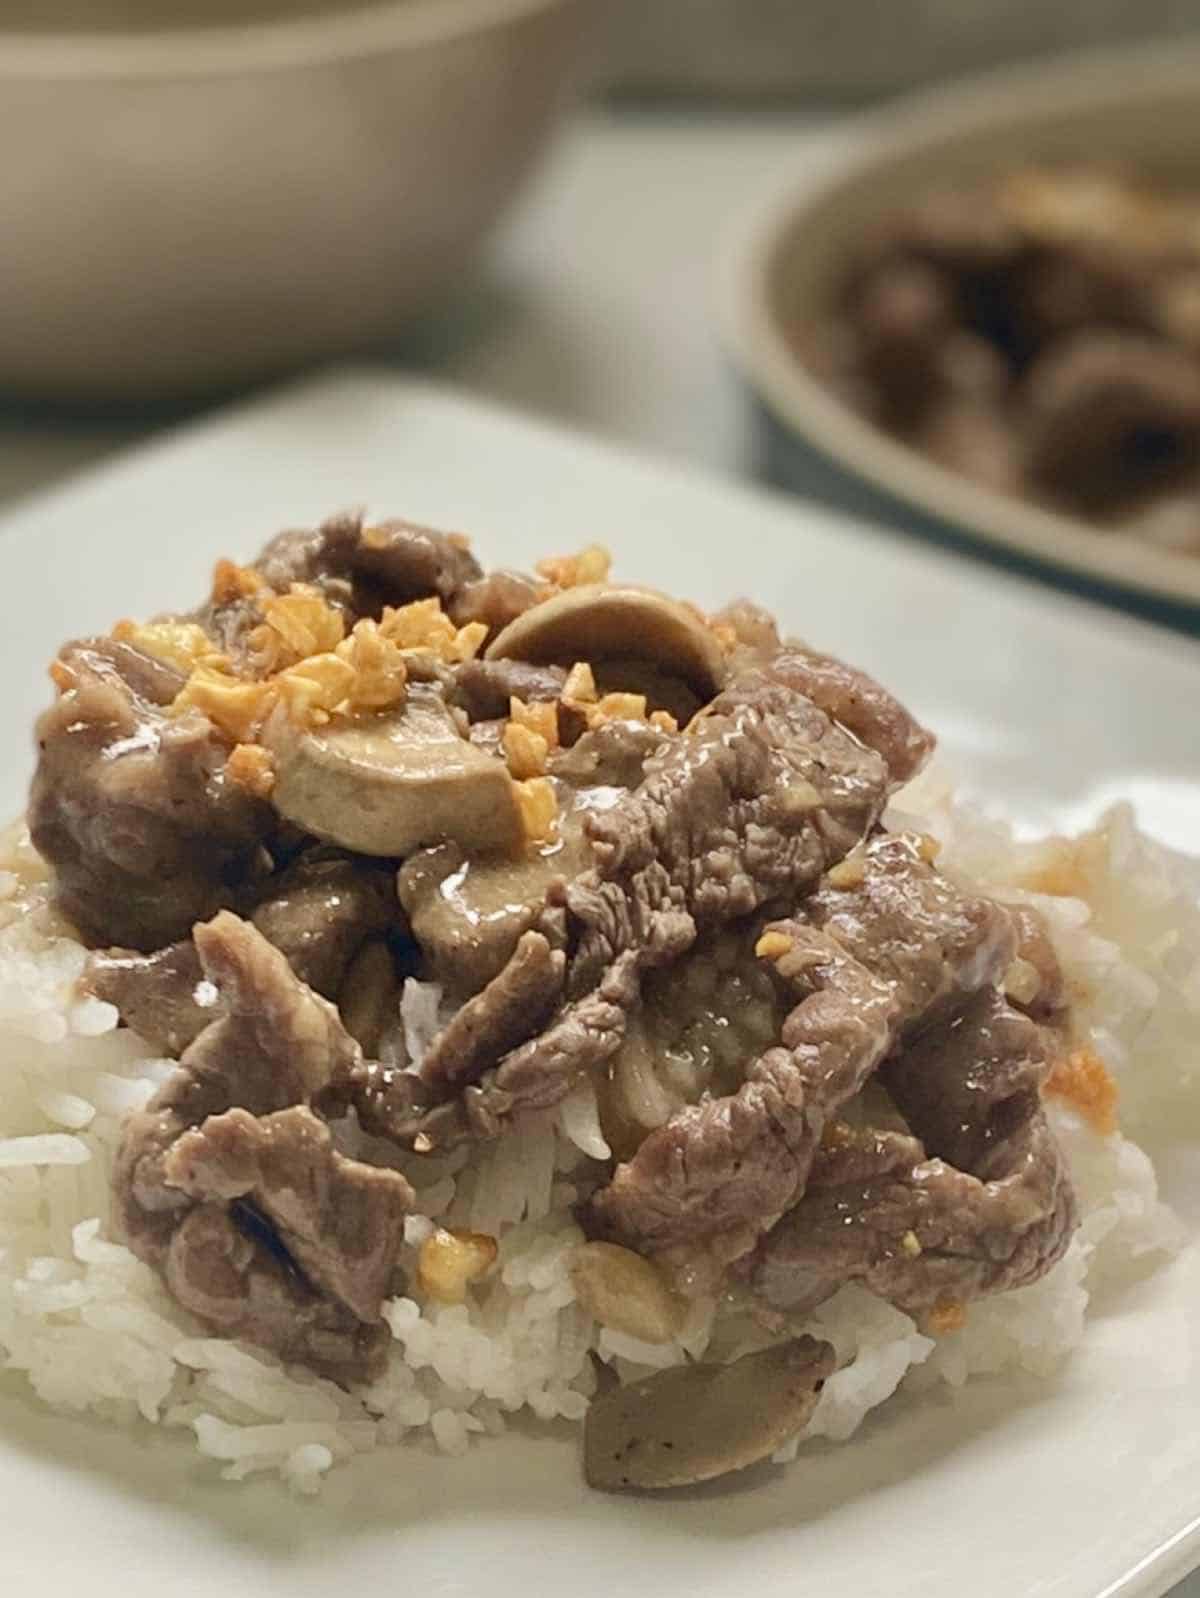 garlic pepper beef served over steamed rice in a white plate